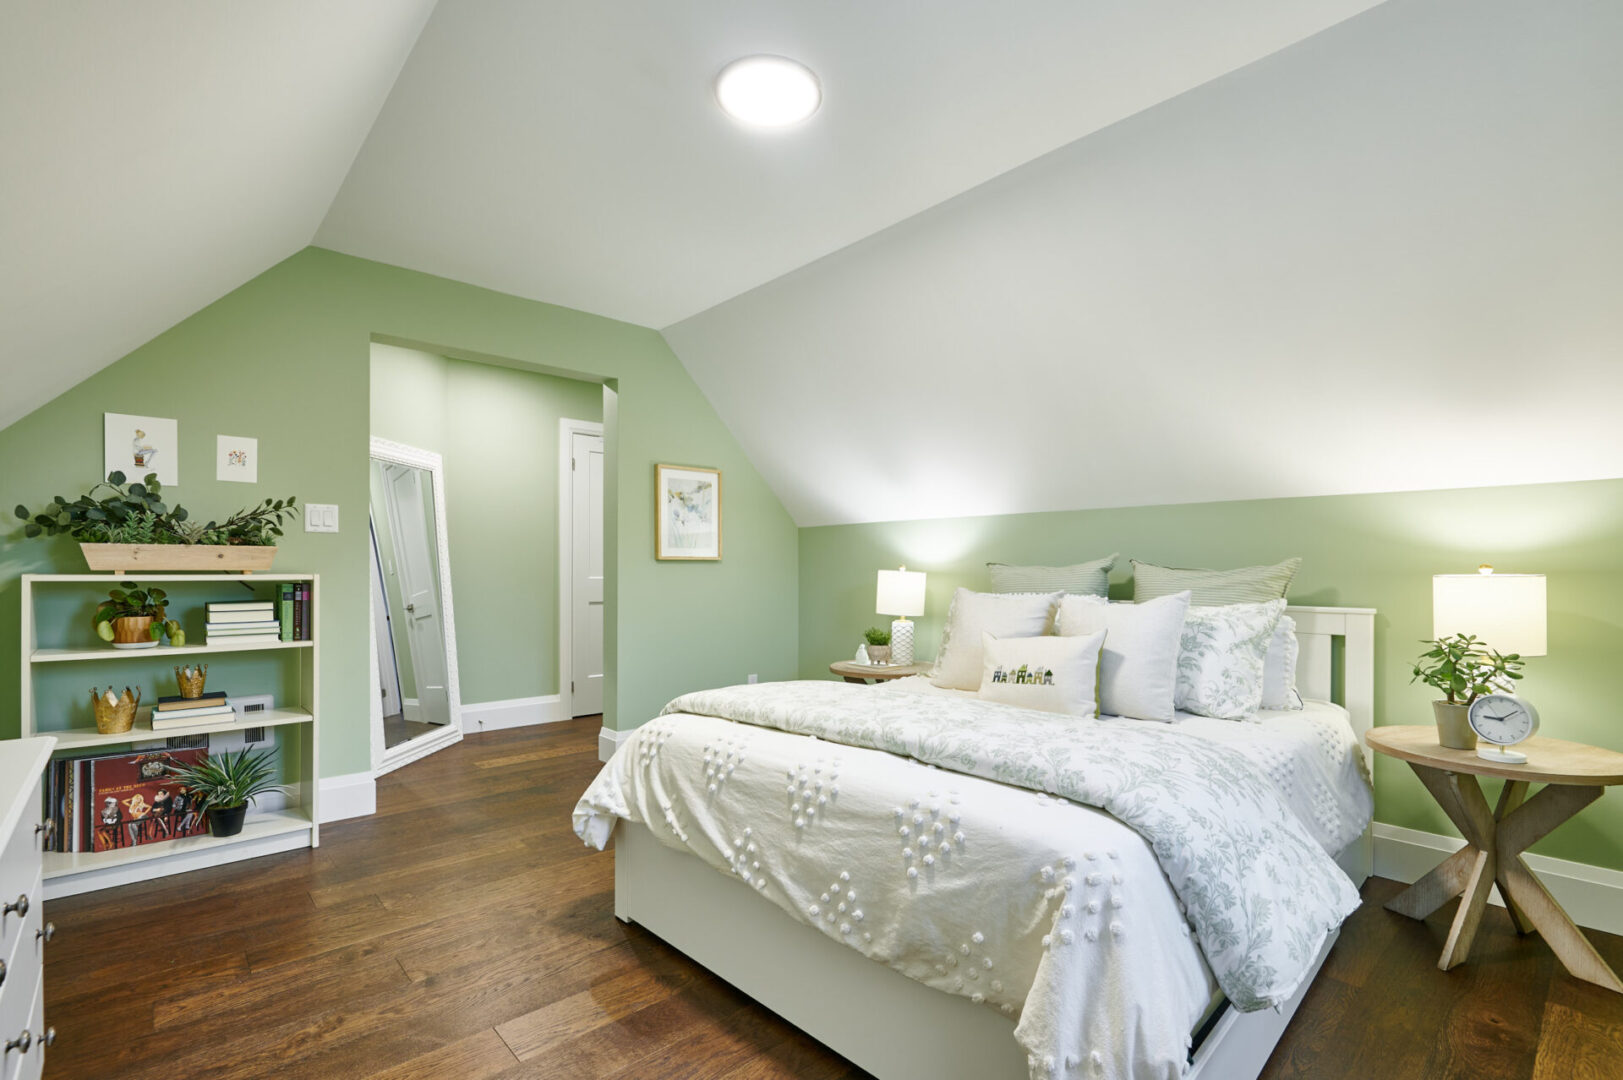 A bedroom with green walls and white bedding.